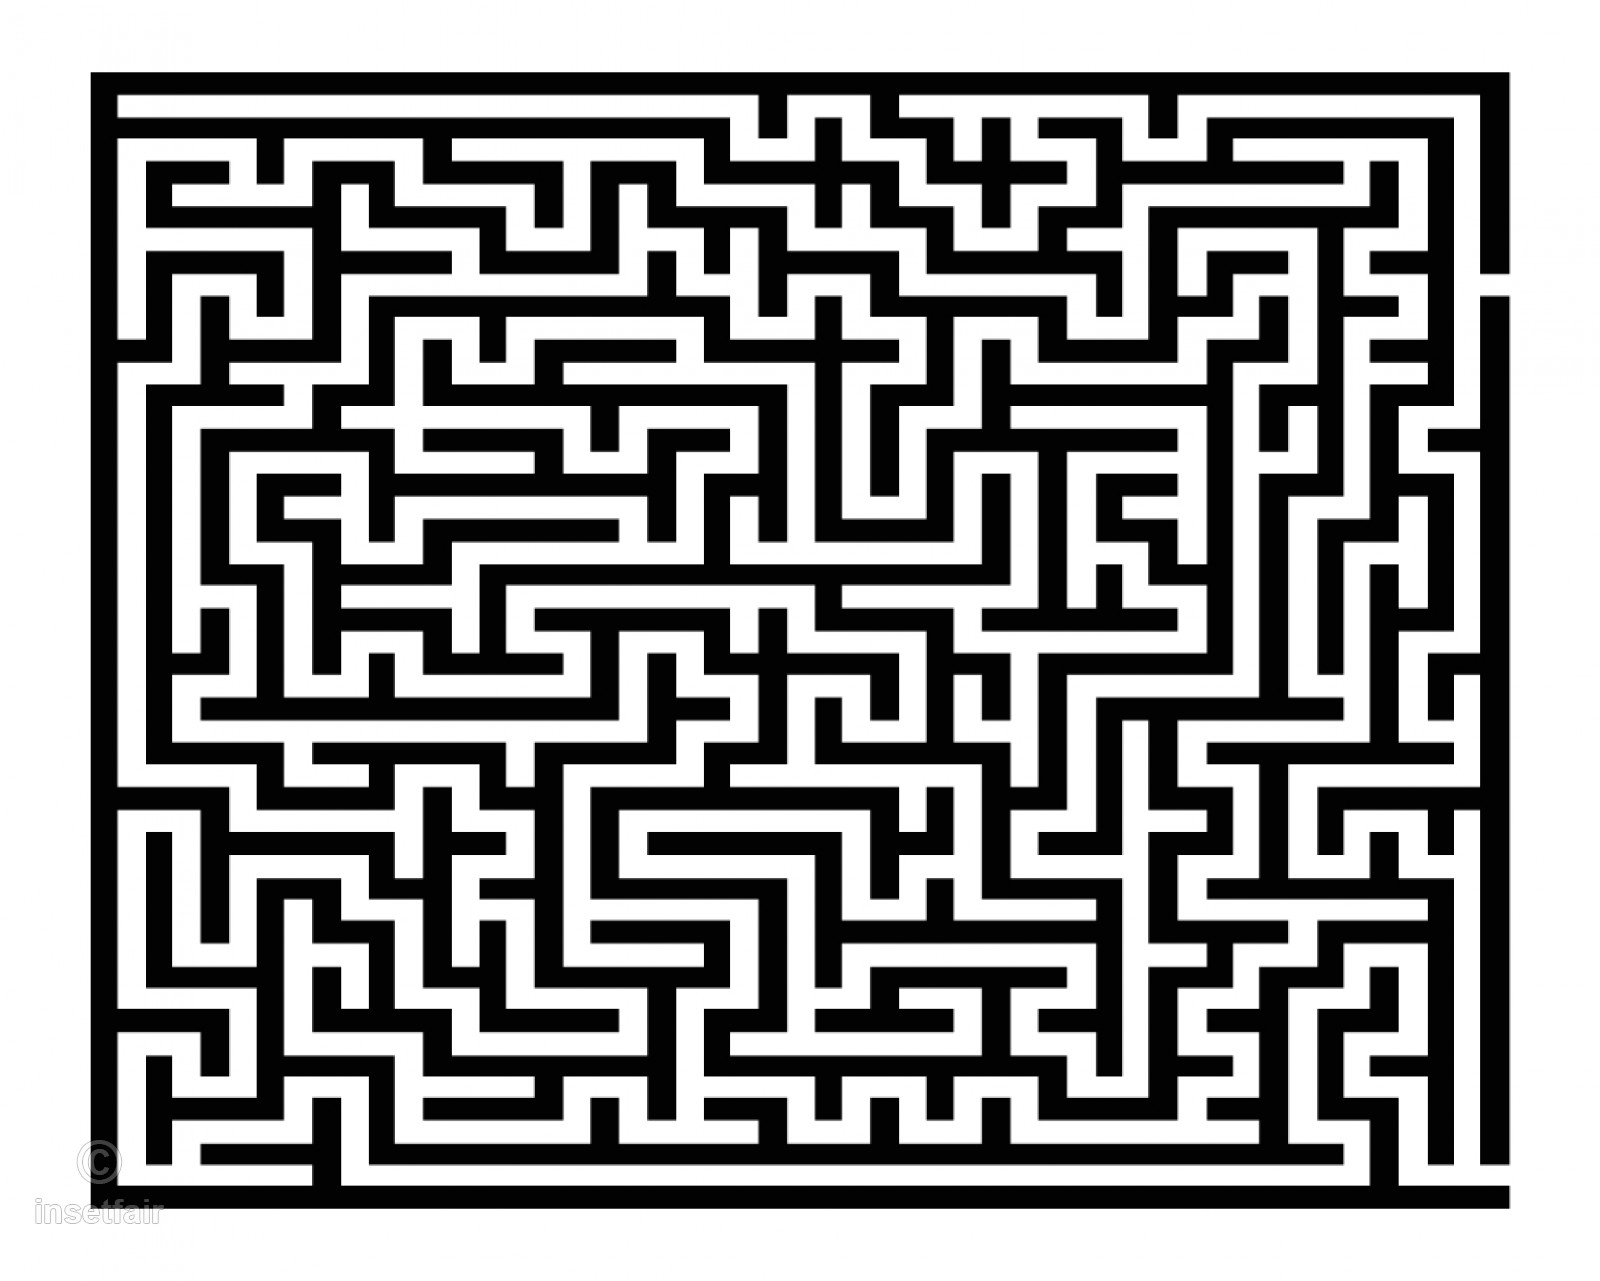 Medium Difficulty Maze Printable Puzzle Game For Free Download - Printable Puzzles Mazes